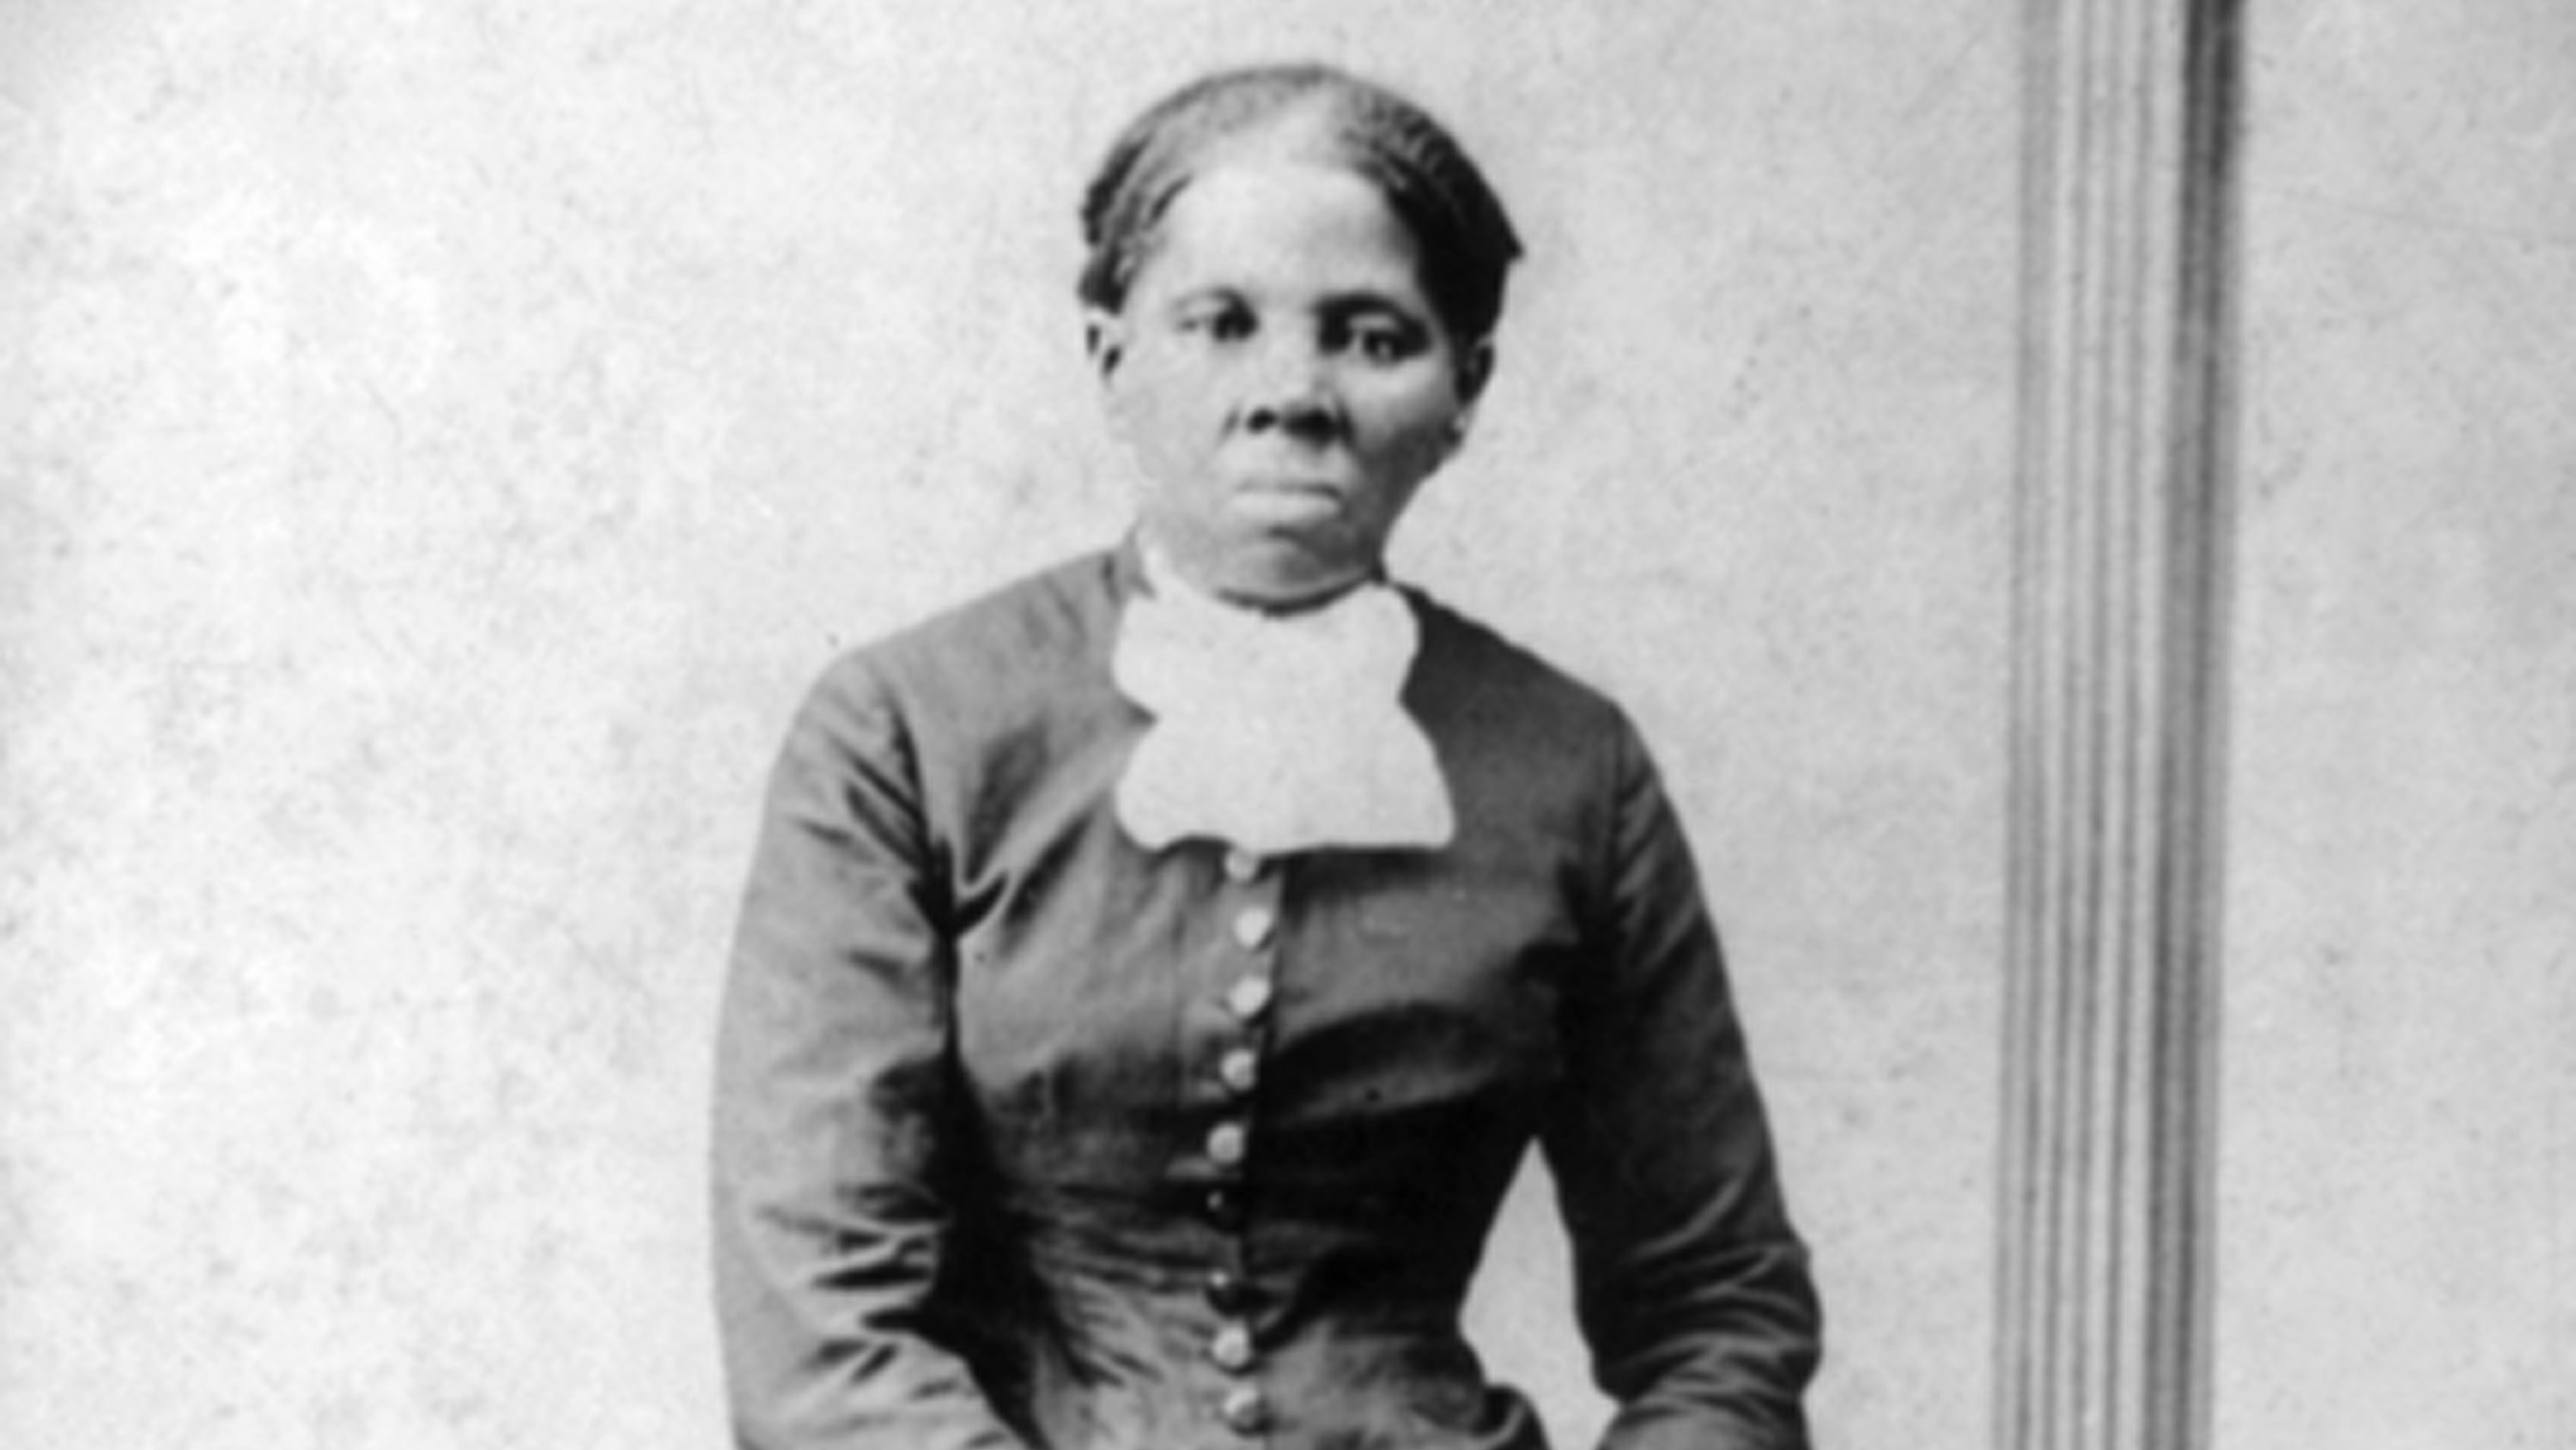 Image of Harriet Tubman standing against a chair.